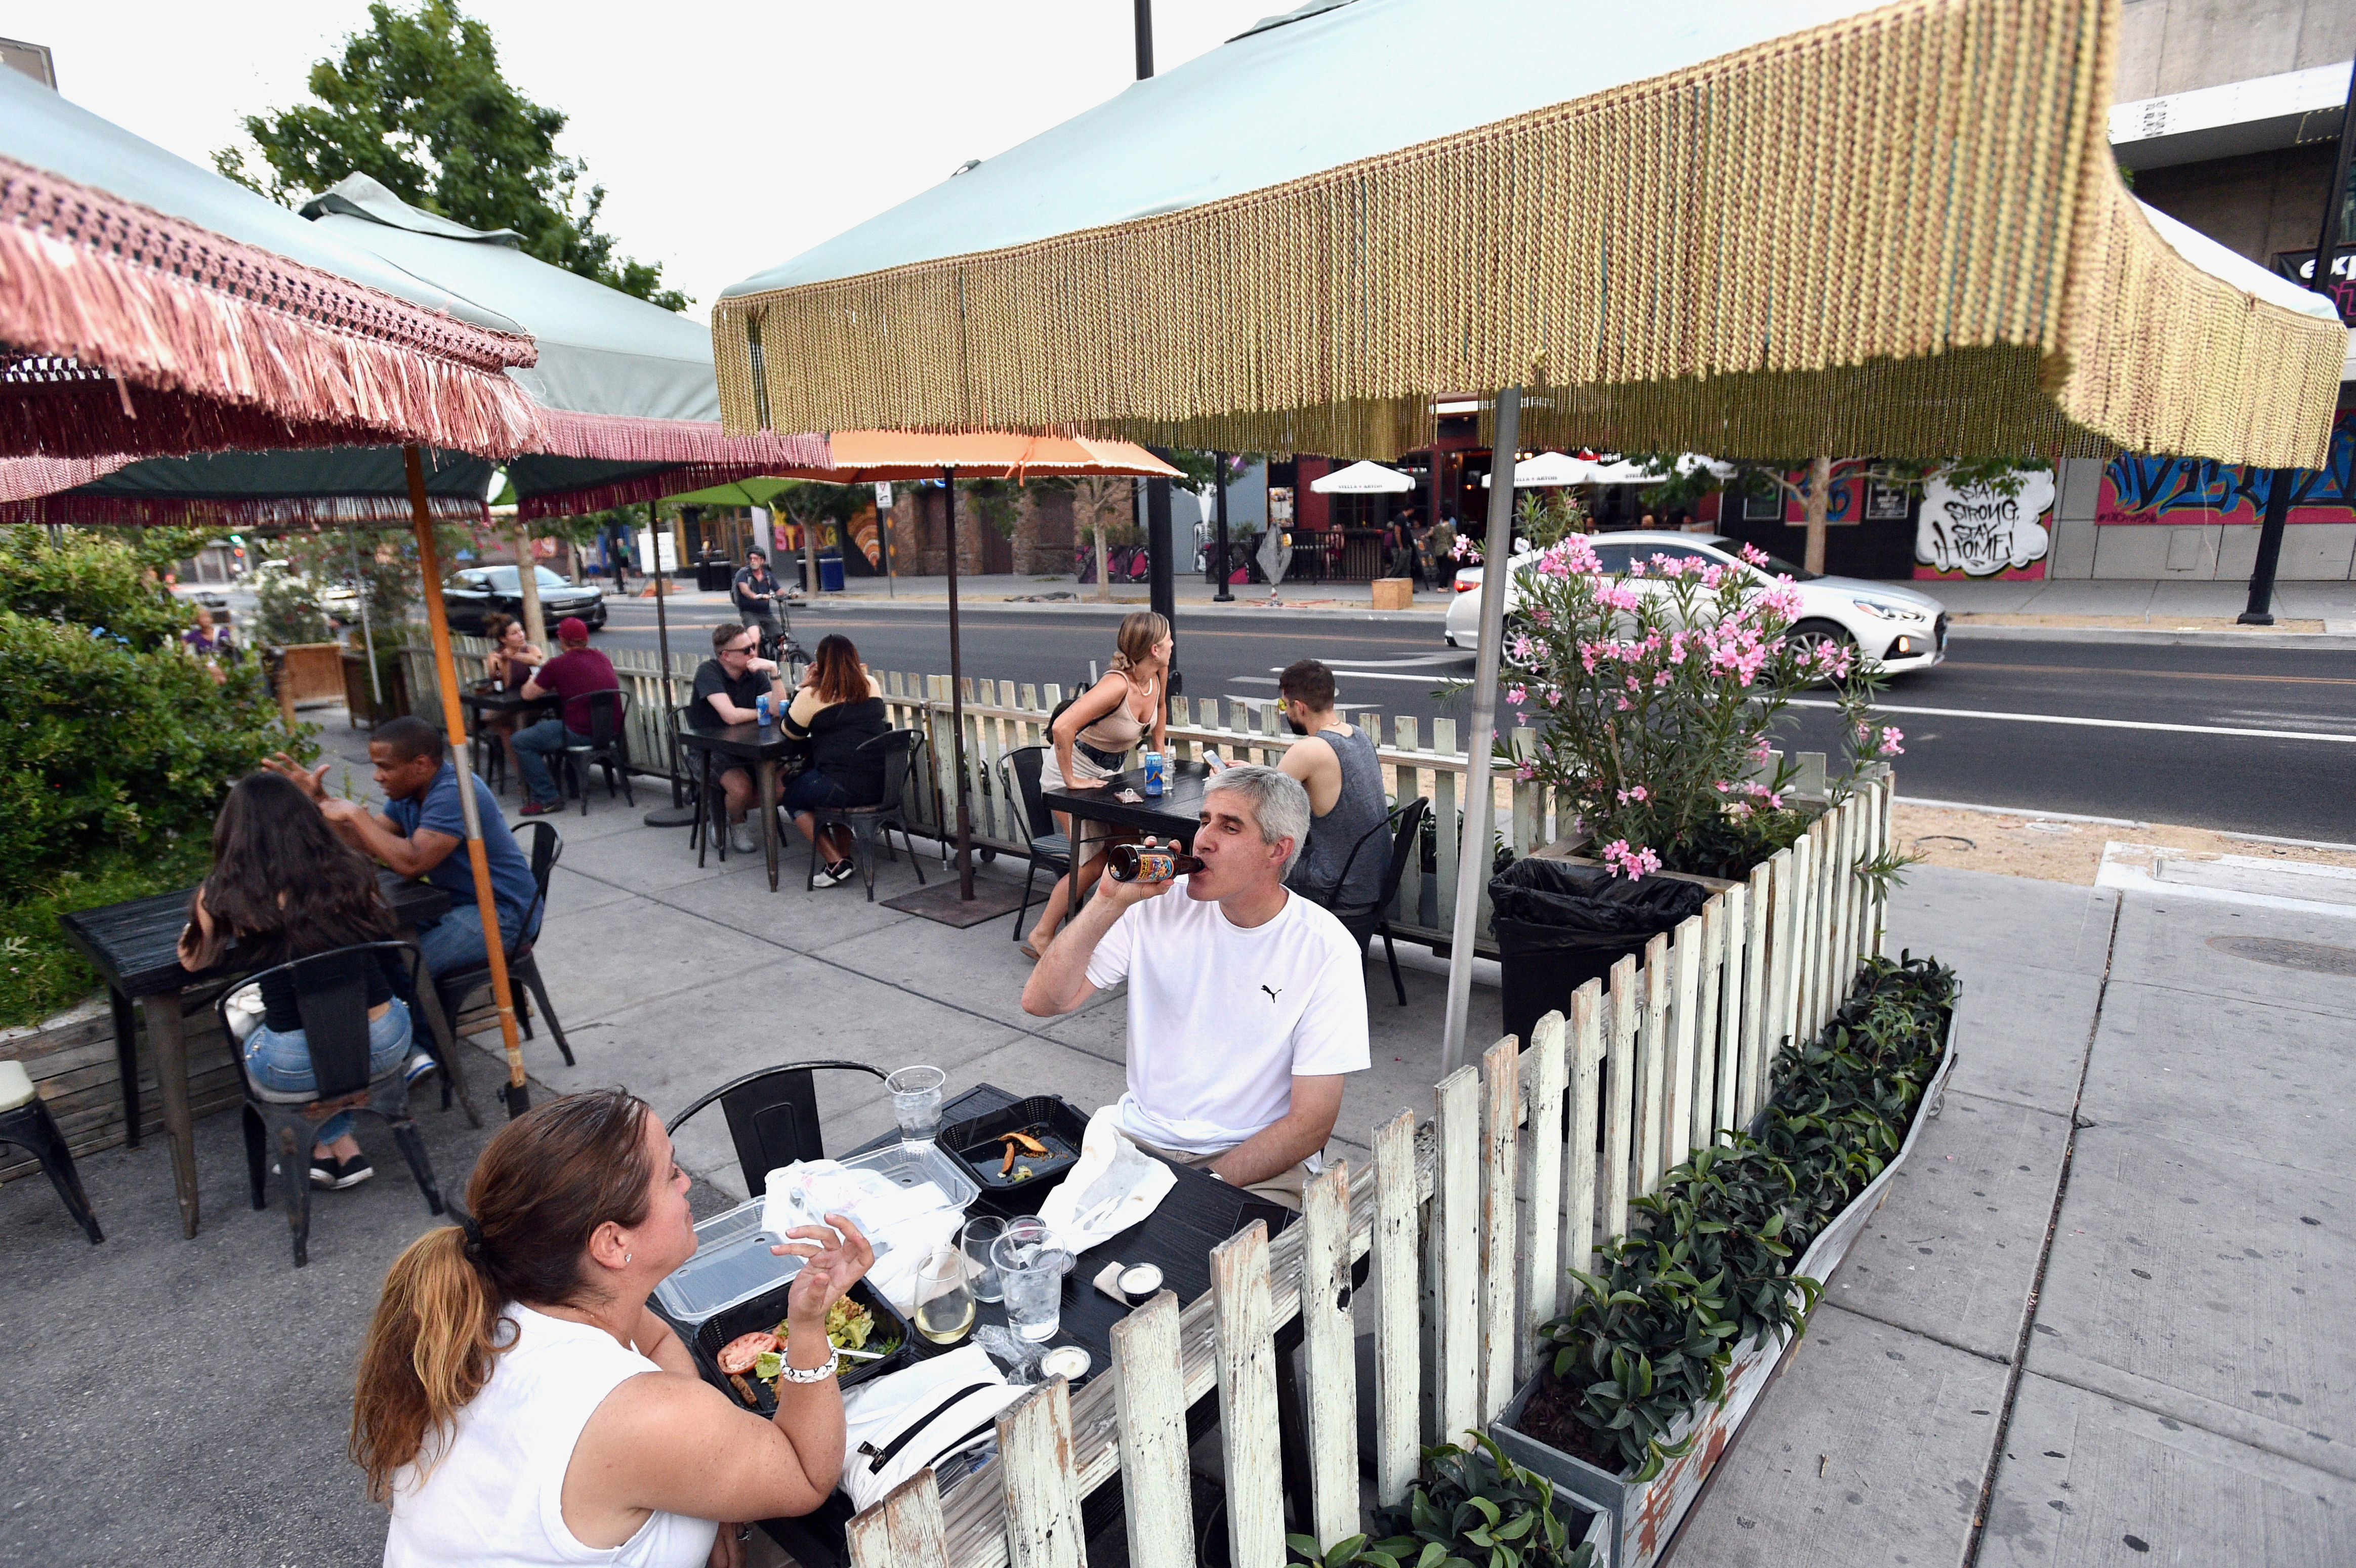 Cori Thune (L) and Phillip Thune dine outdoors at Park on Fremont as restaurants are opening for business on sidewalks as restrictions to prevent the spread of coronavirus disease (COVID-19) are eased in Las Vegas